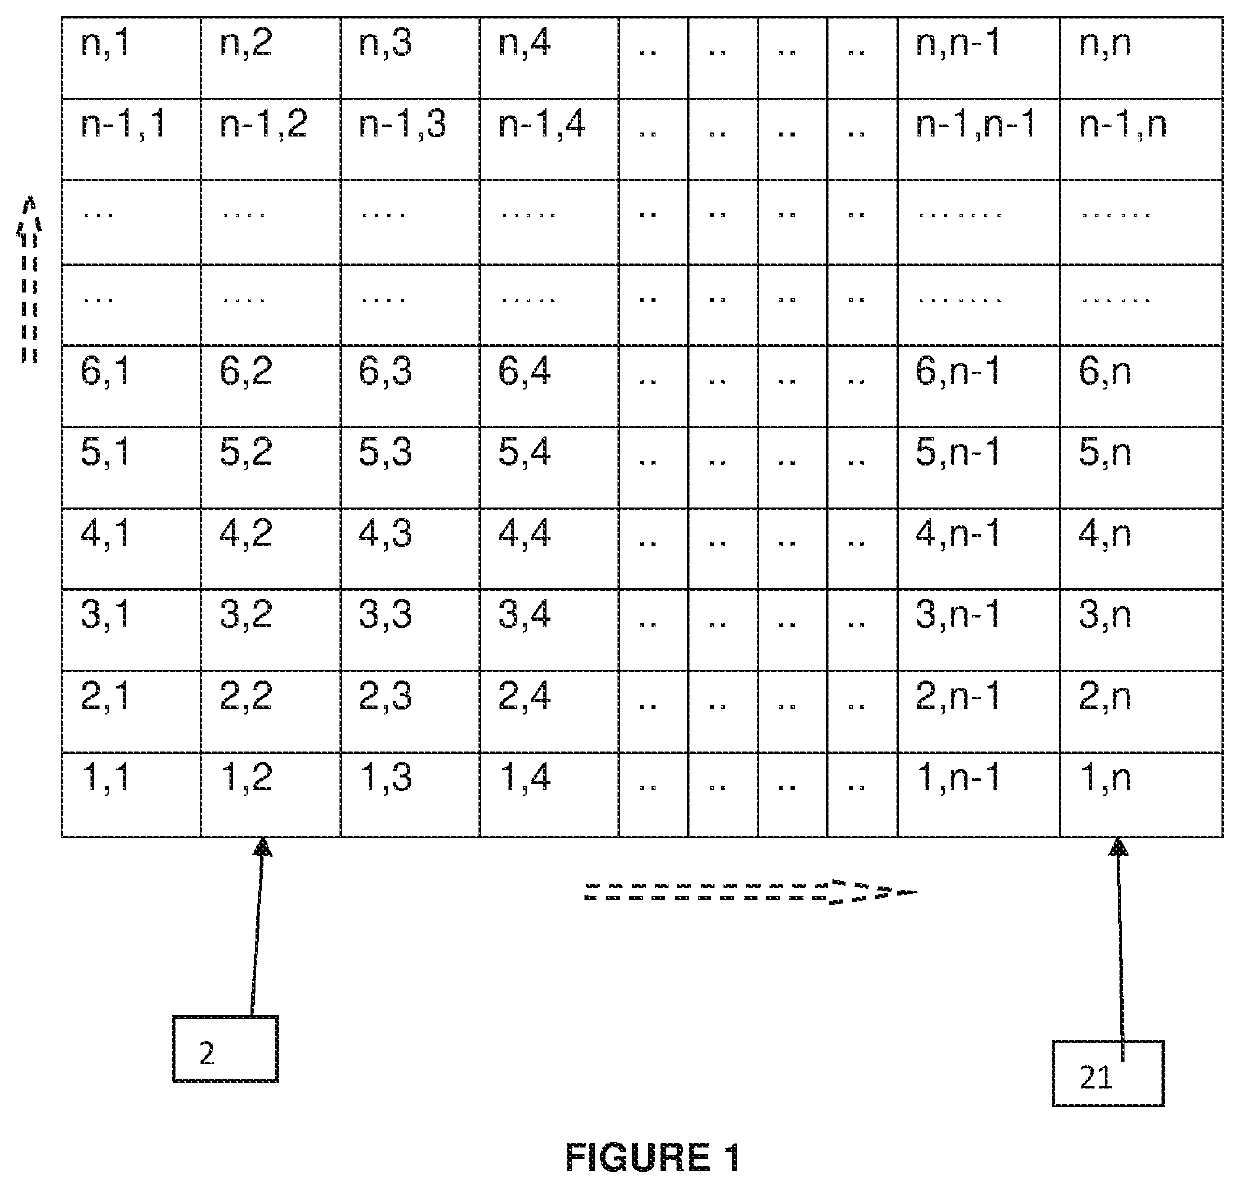 Cognitive training and play device, for familiarizing squares, square roots and prime numbers